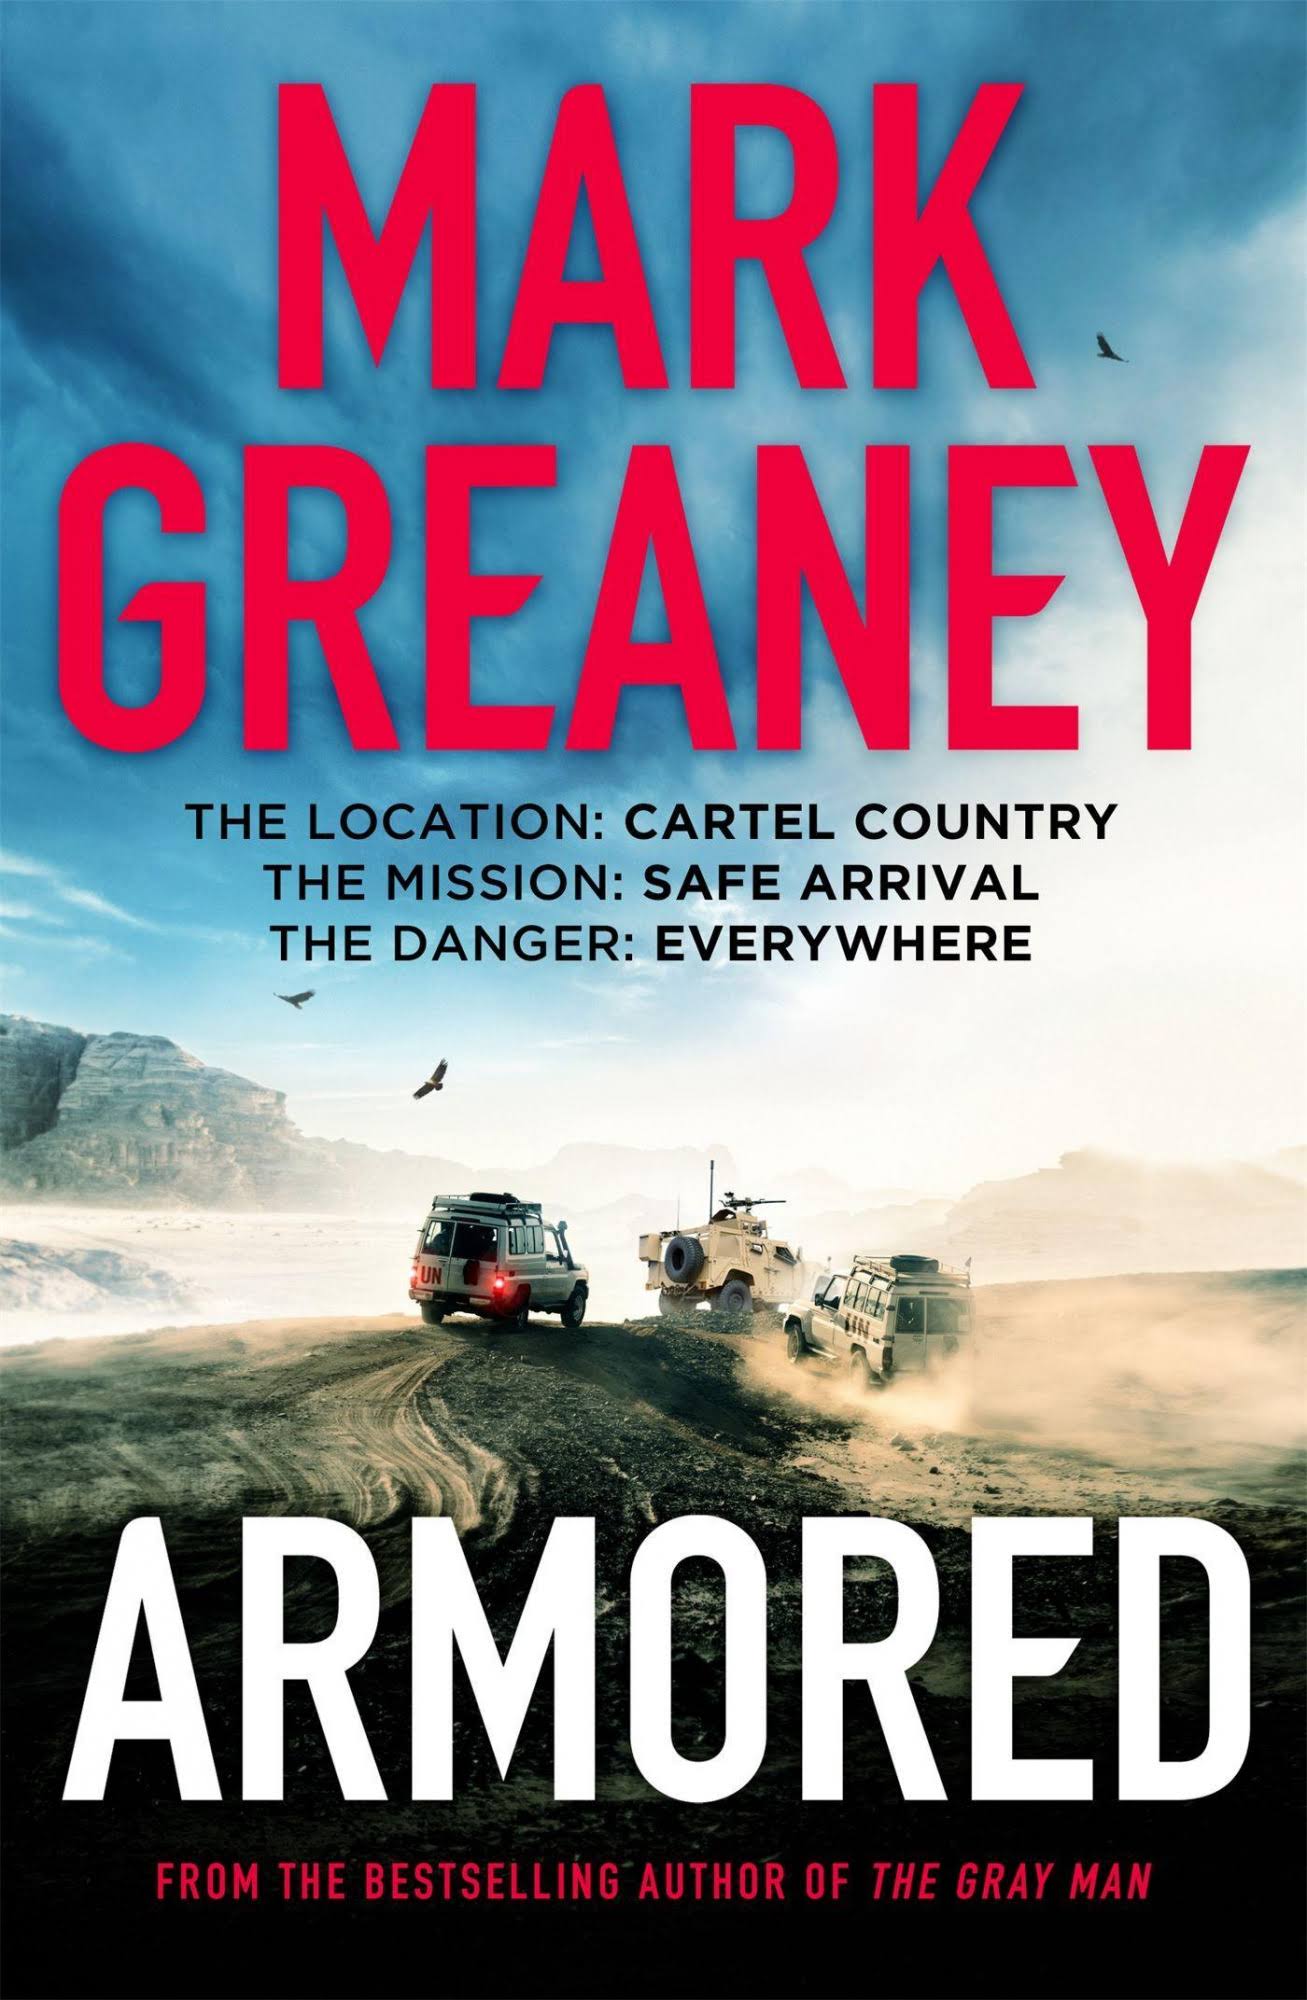 Armored by Mark Greaney